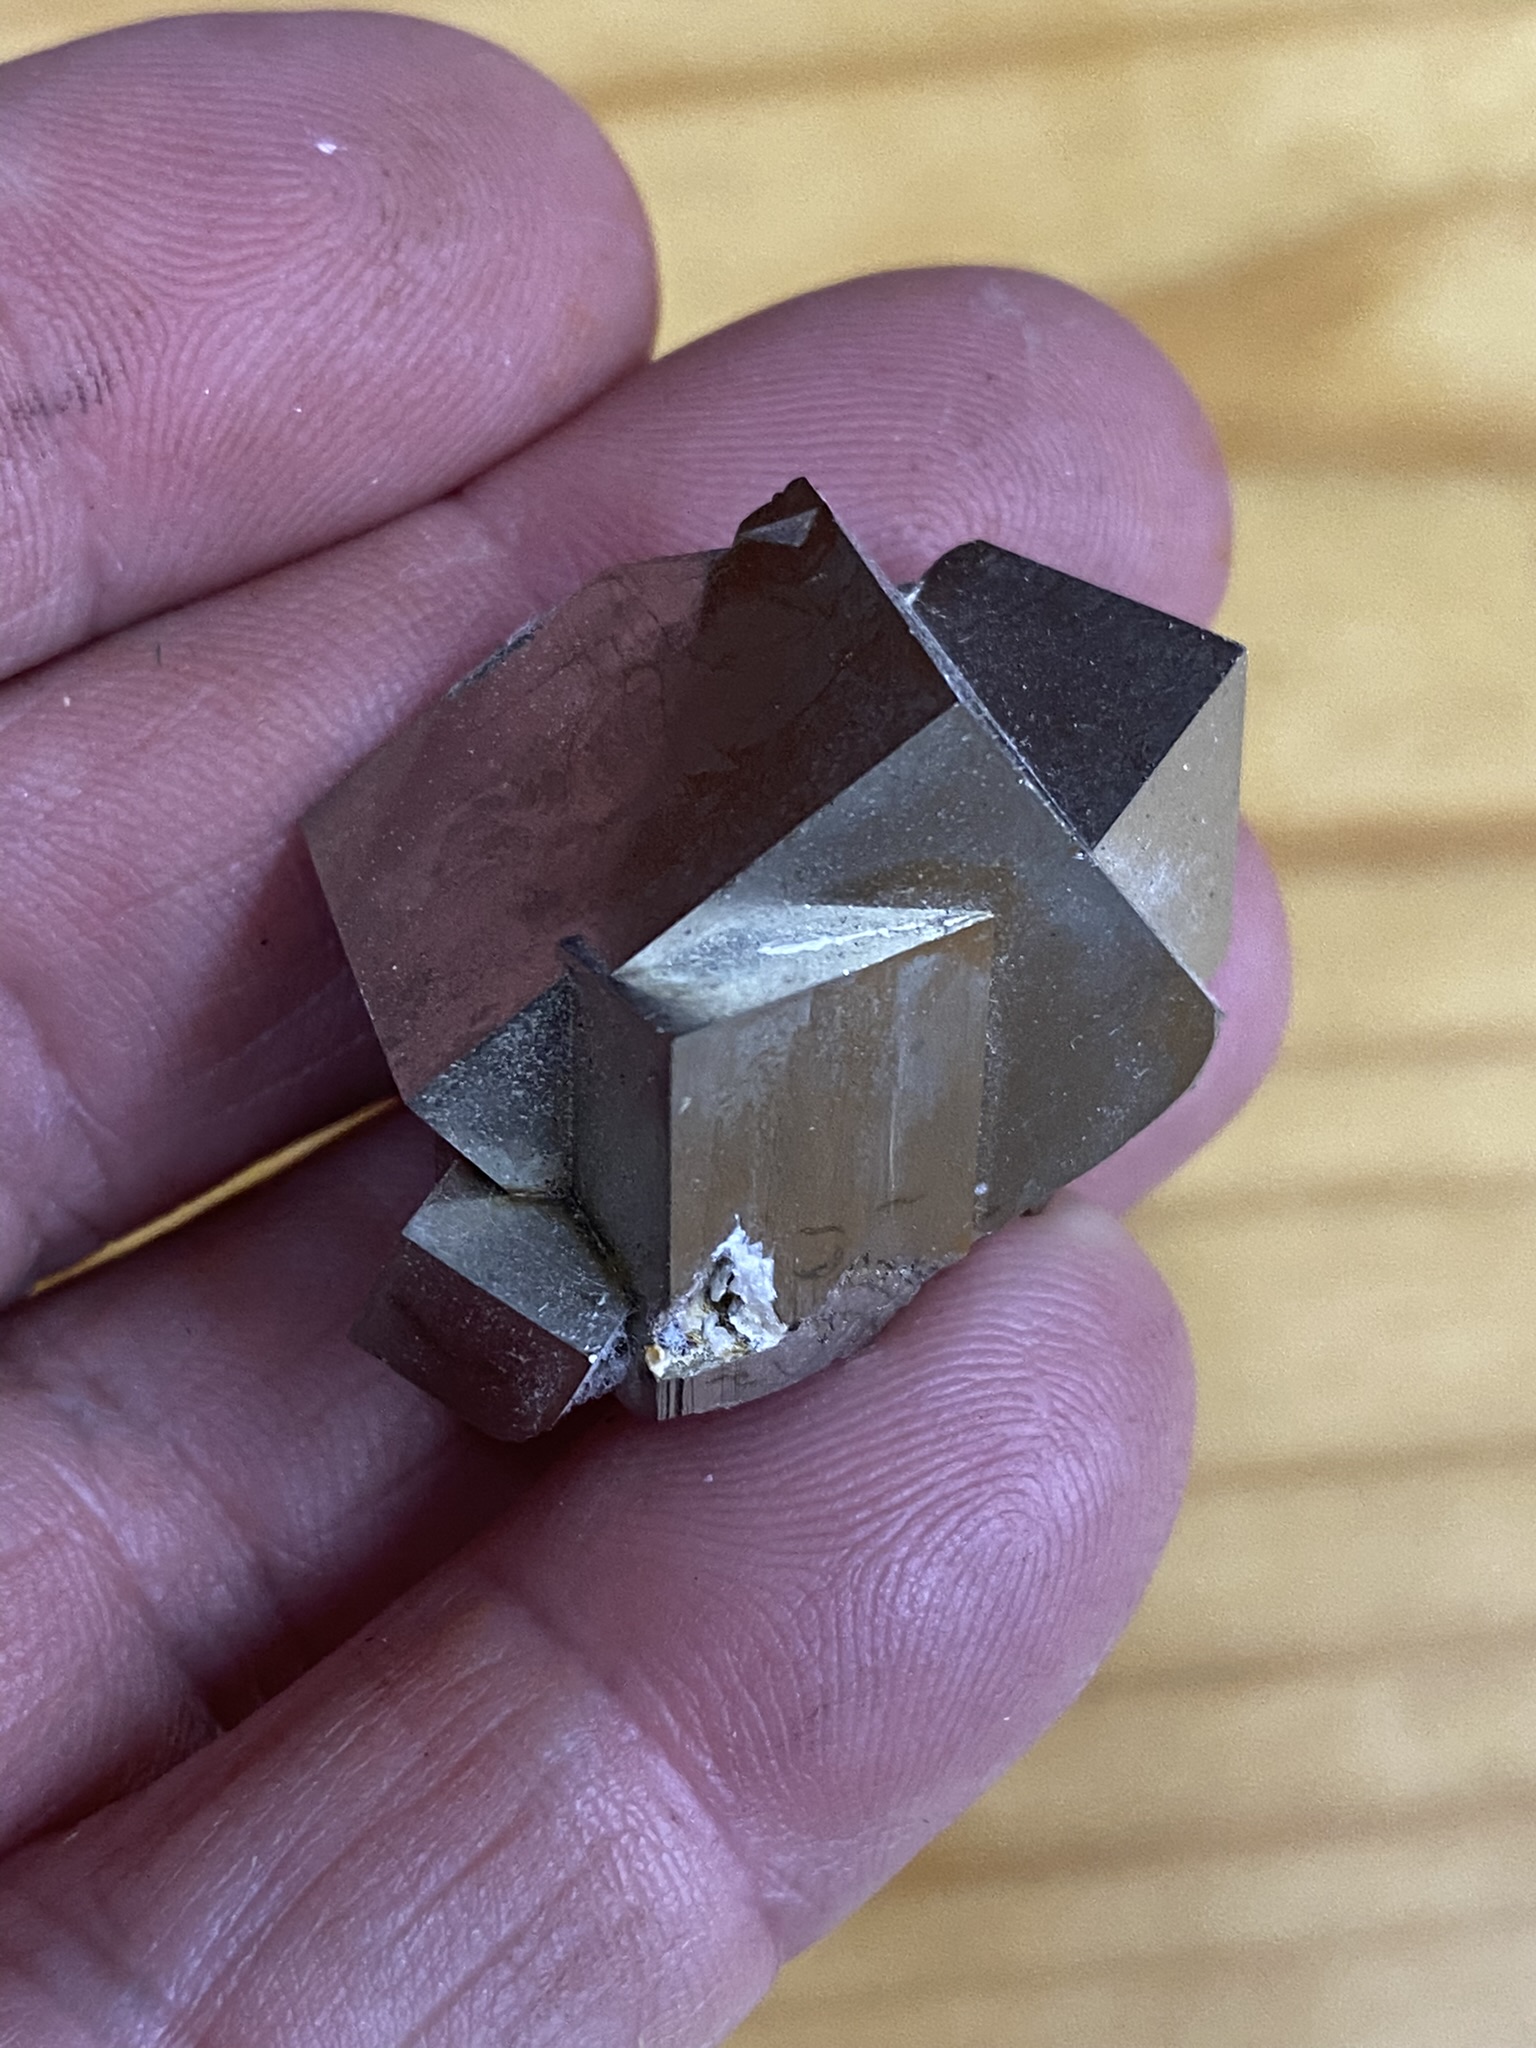 Pyrite cubes from Spain